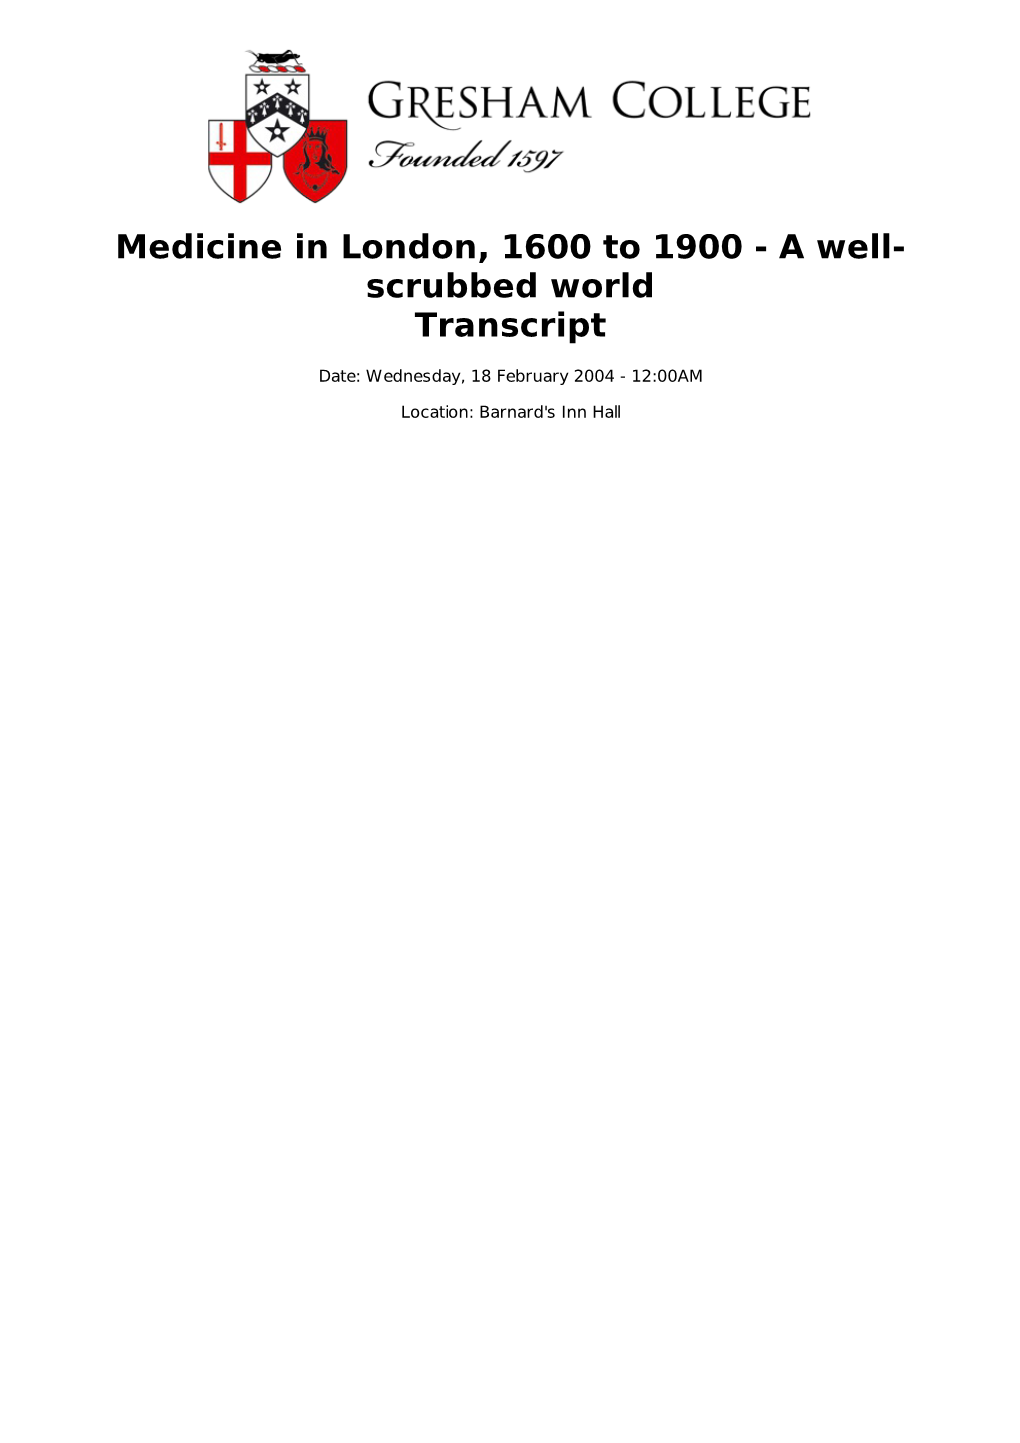 Medicine in London, 1600 to 1900 - a Well- Scrubbed World Transcript